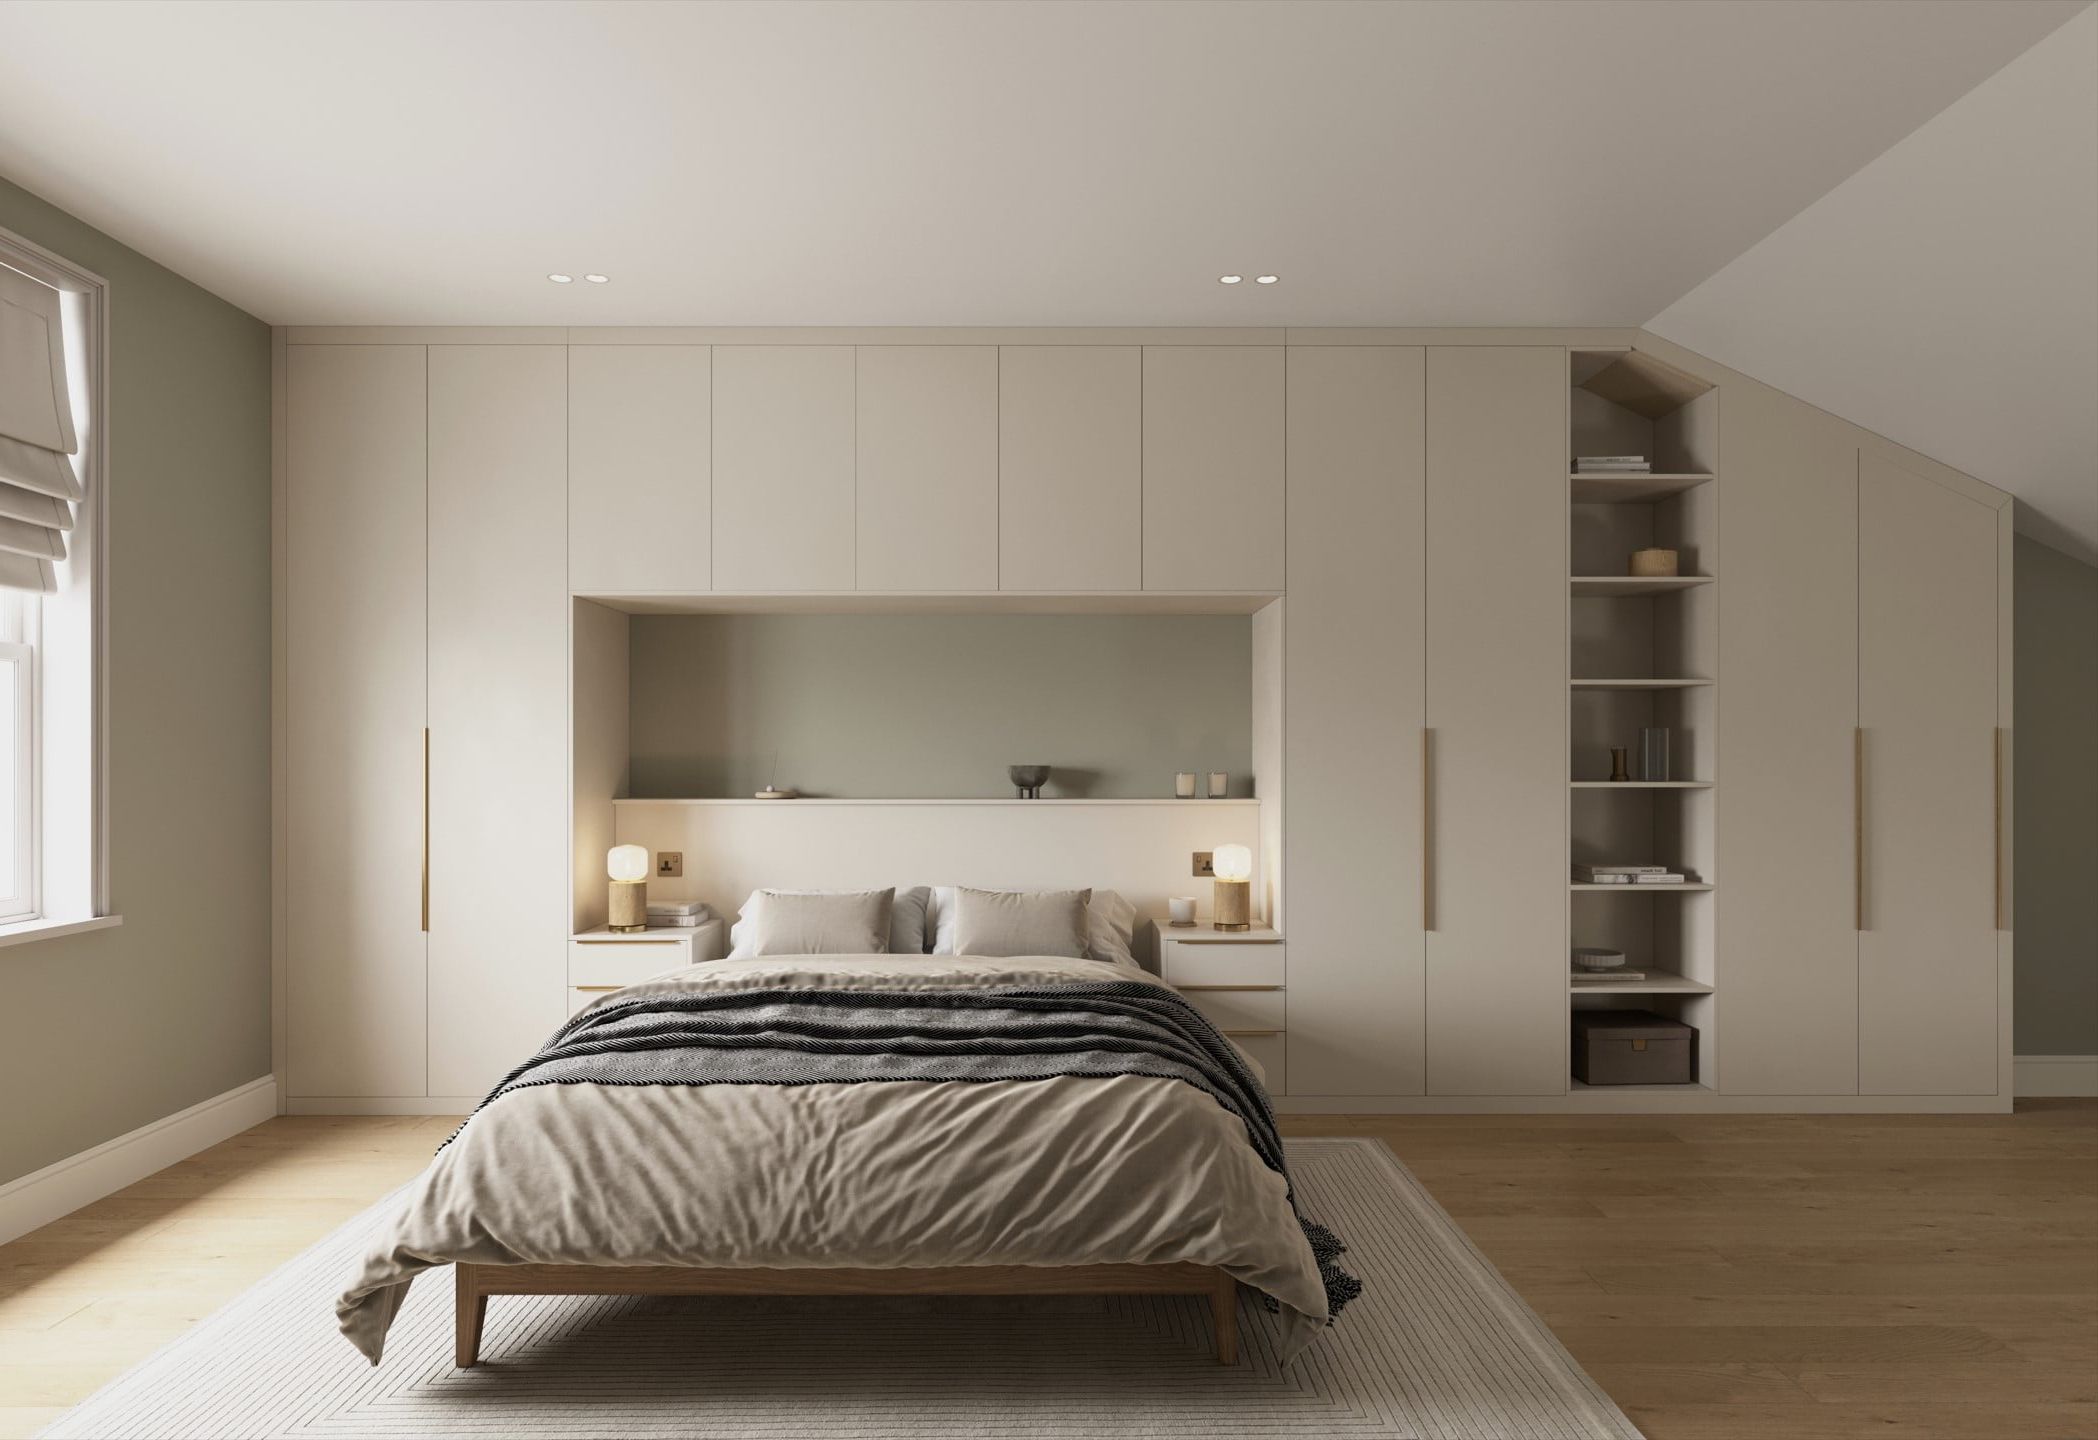 Overbed Fitted Wardrobes And Storage Units, Bespoke Overhead Storage Intended For Overbed Wardrobes (Gallery 10 of 20)